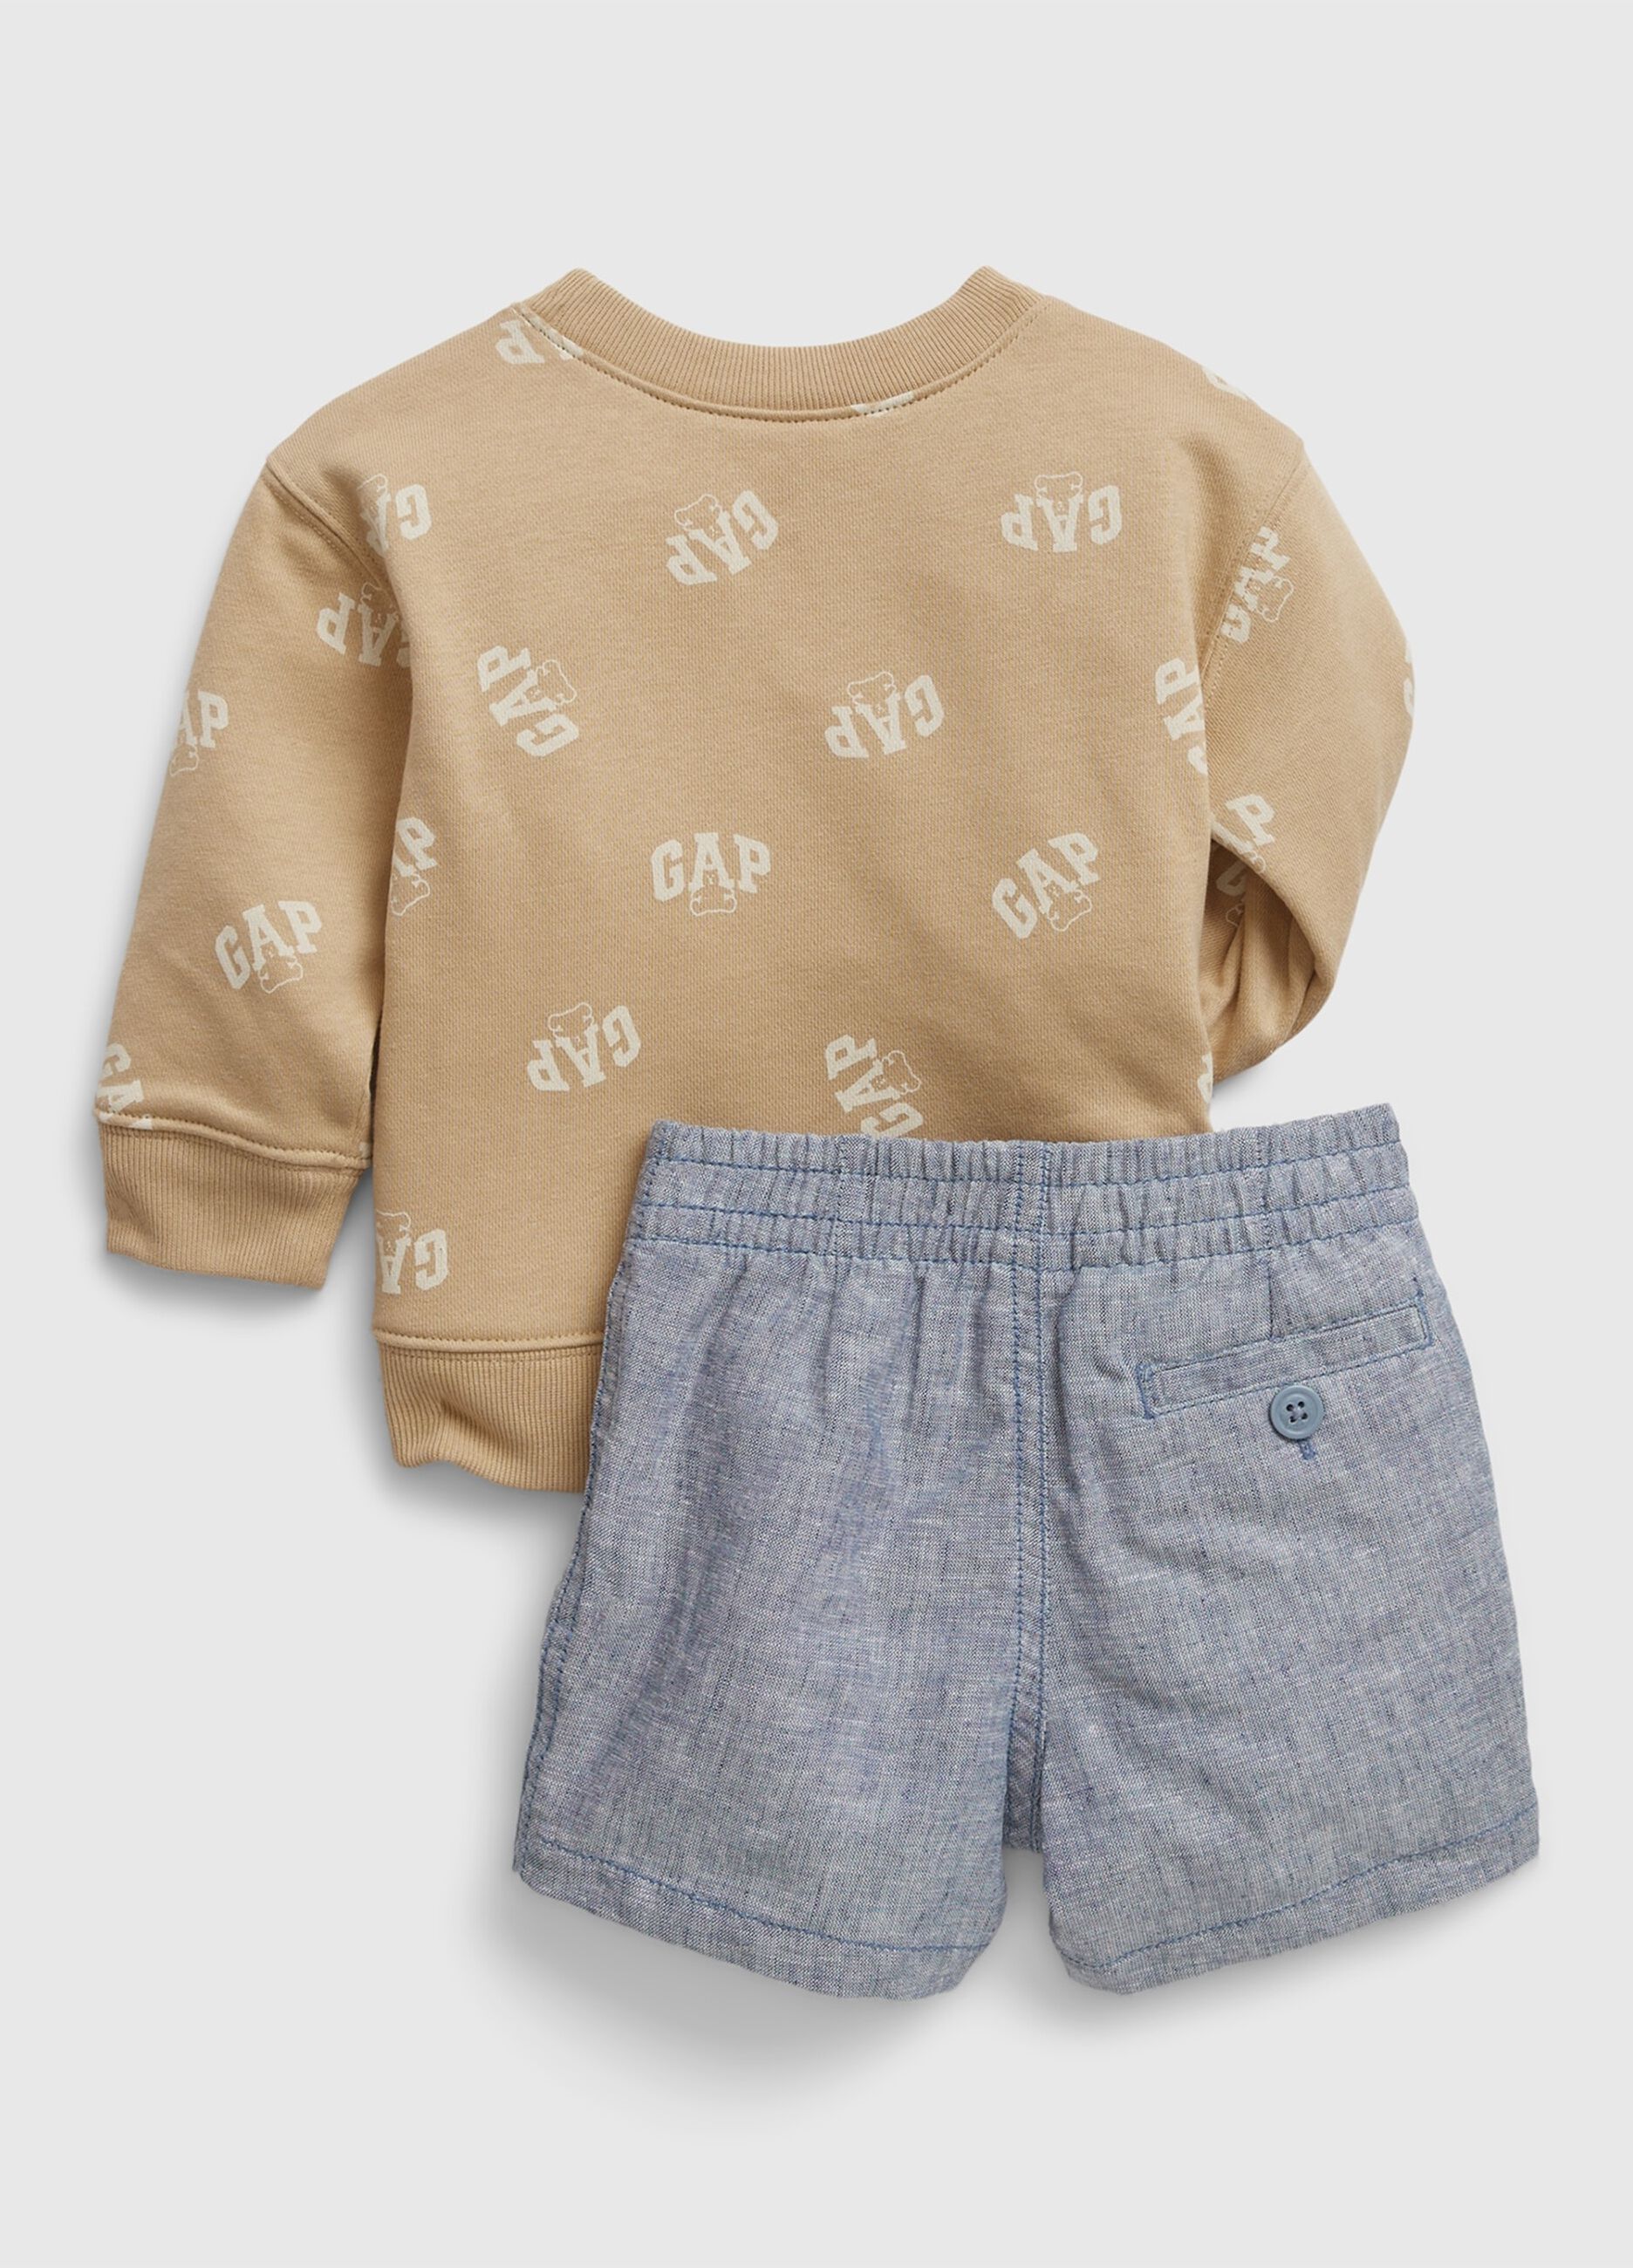 Jogging set with sweatshirt and shorts in cotton_1